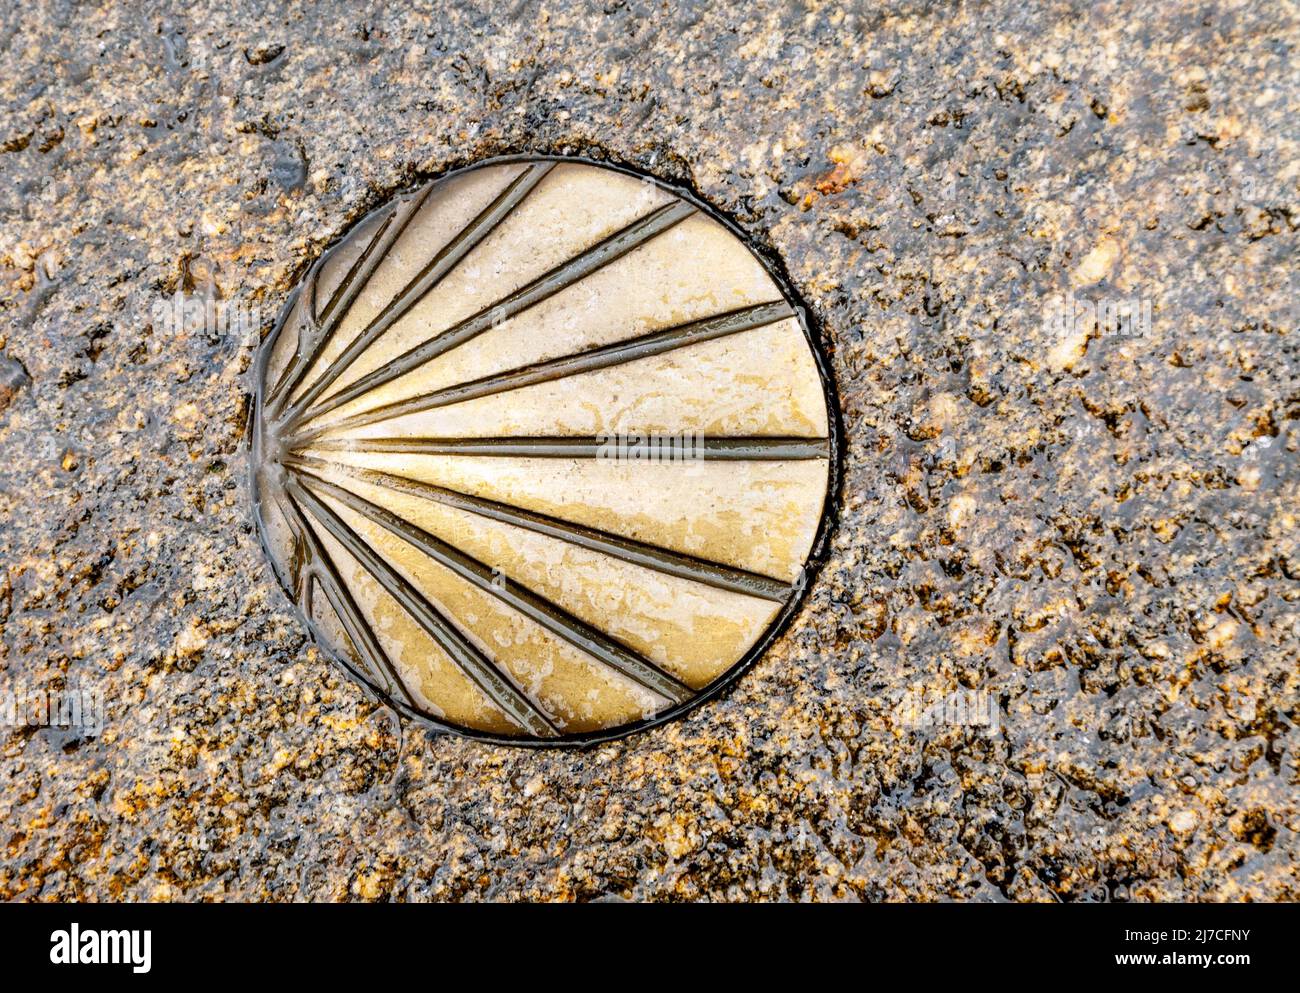 Santiago's shell on the pavement Stock Photo